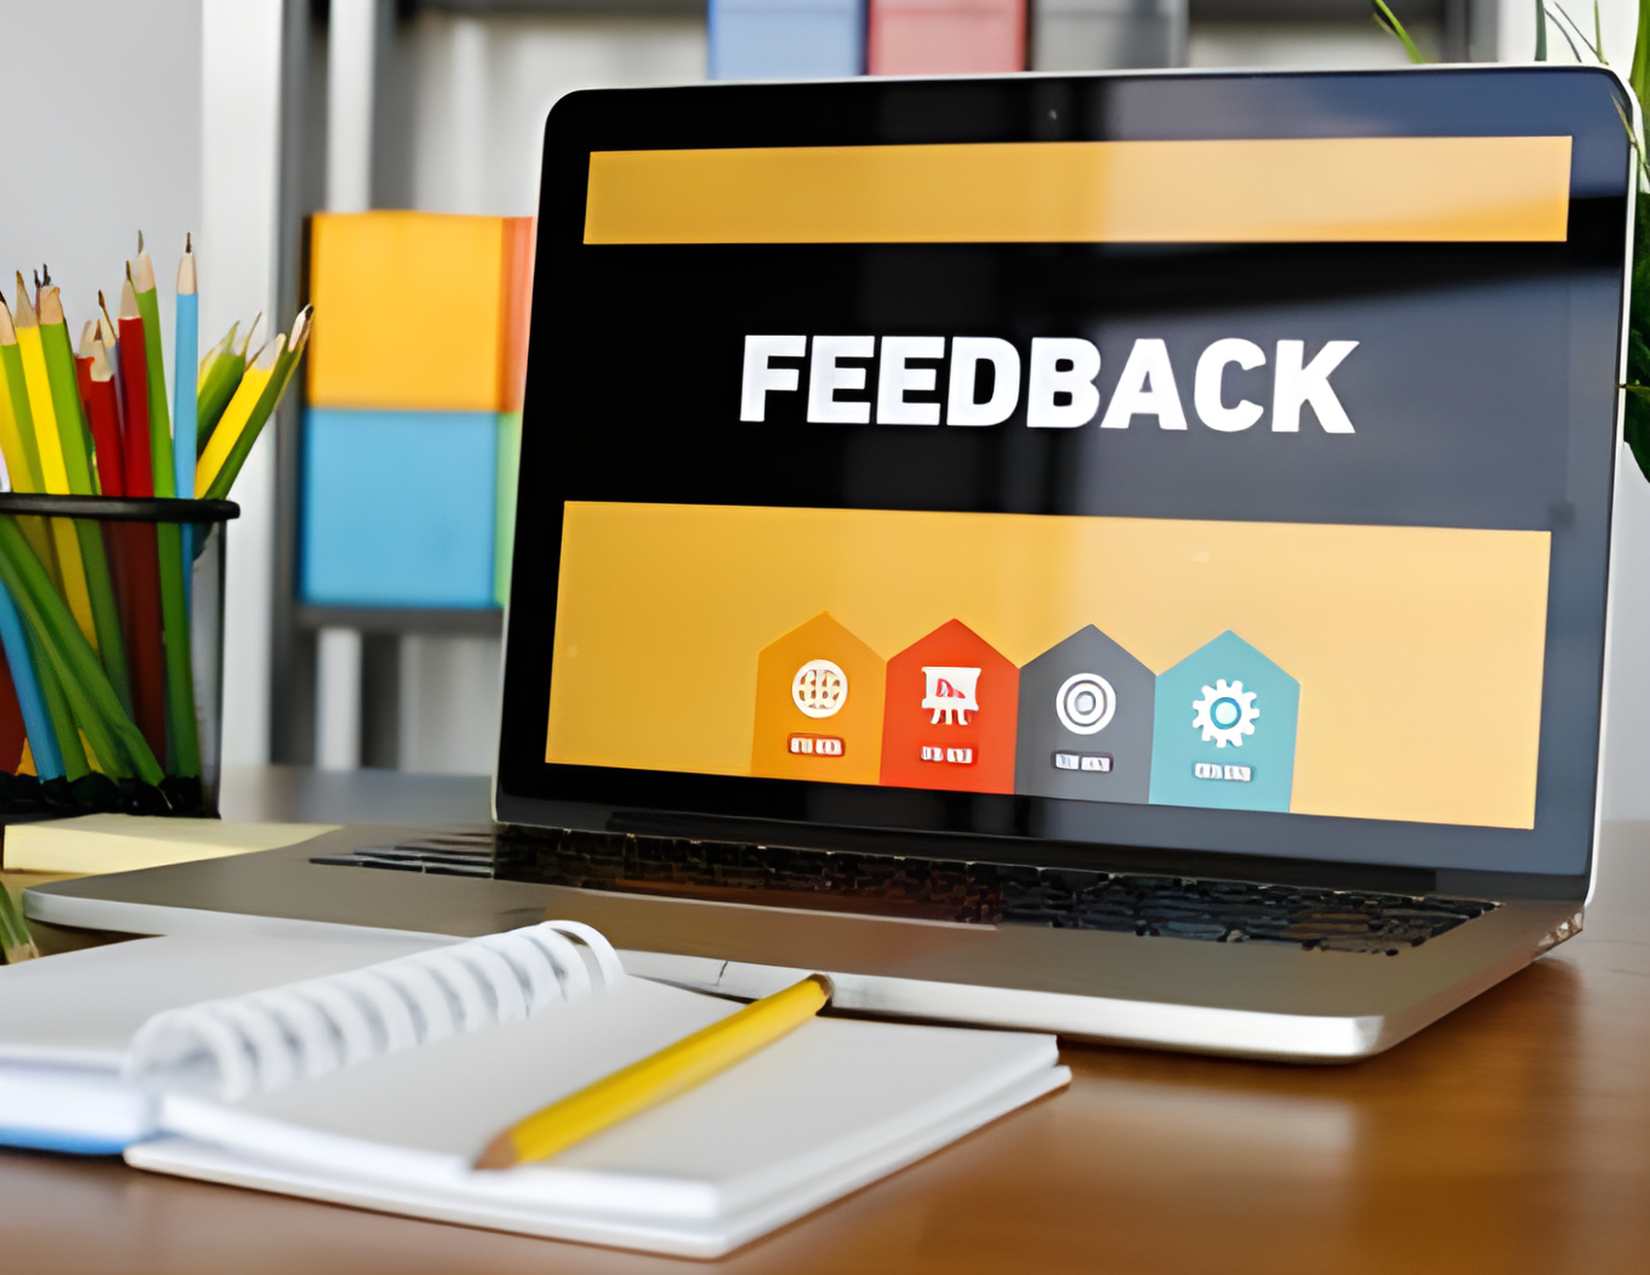 Read Questions to Survey Users Before Designing Your Next School Website